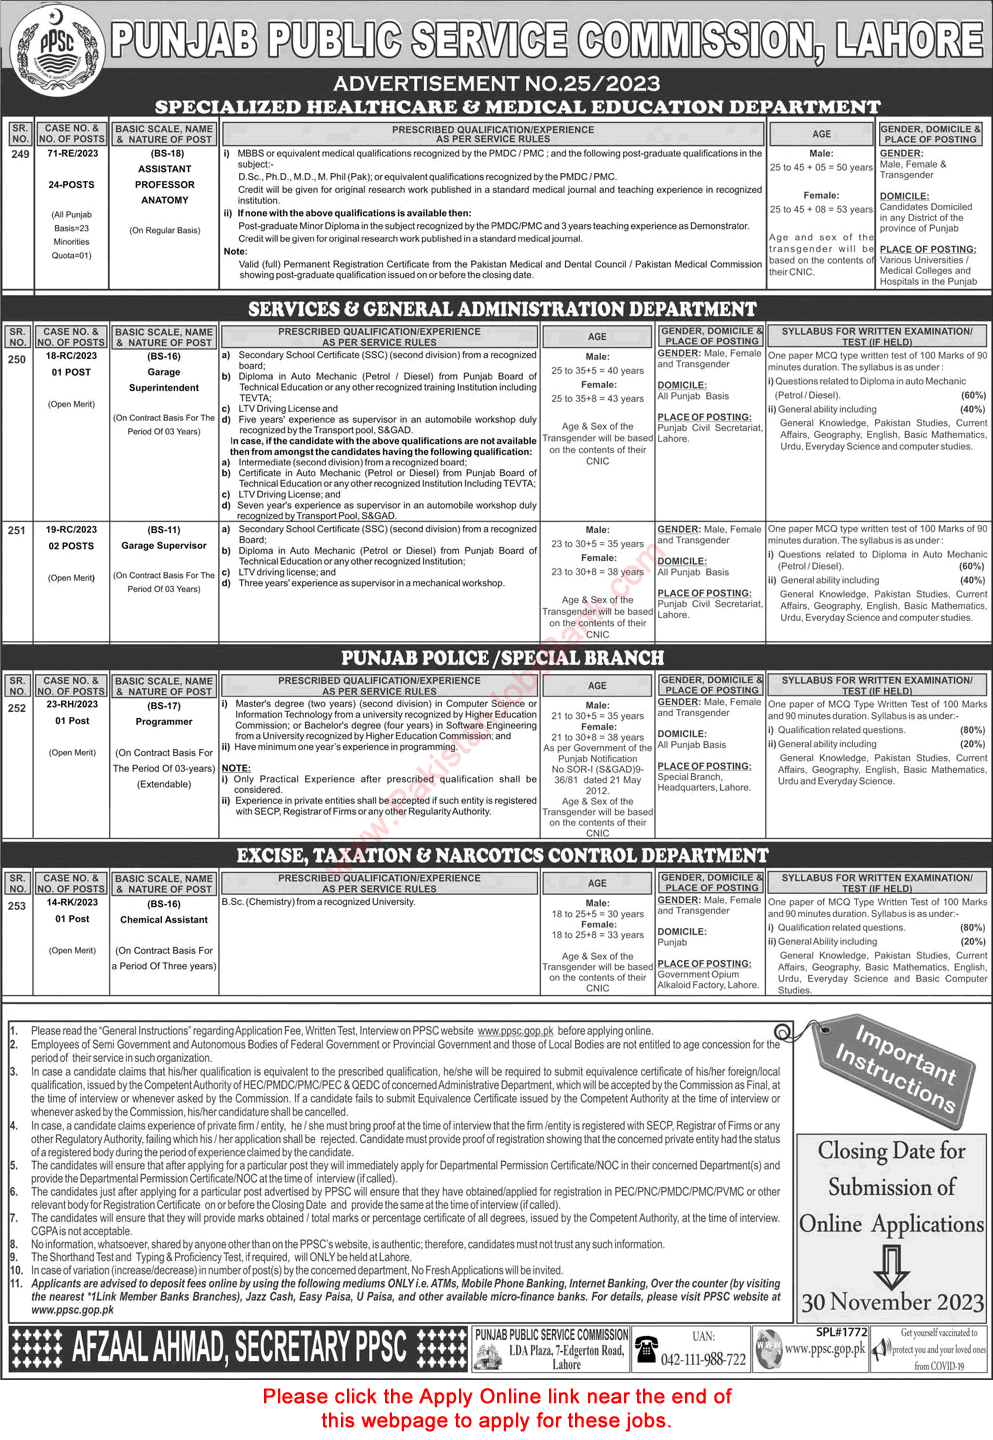 PPSC Jobs November 2023 Online Apply Consolidated Advertisement No 25/2023 Latest